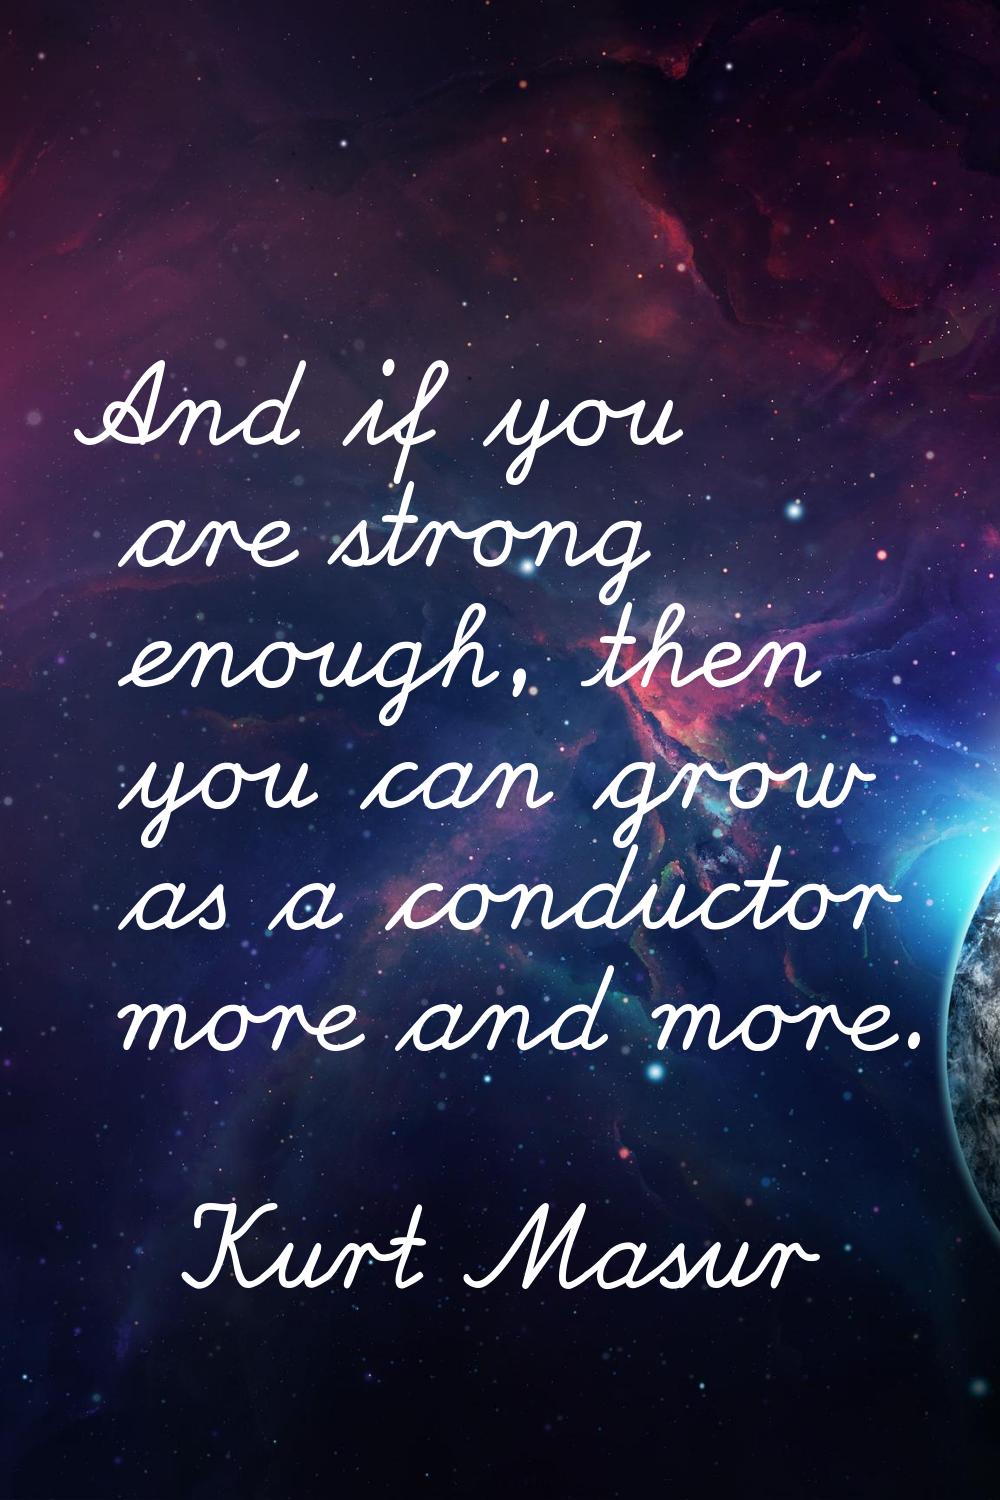 And if you are strong enough, then you can grow as a conductor more and more.